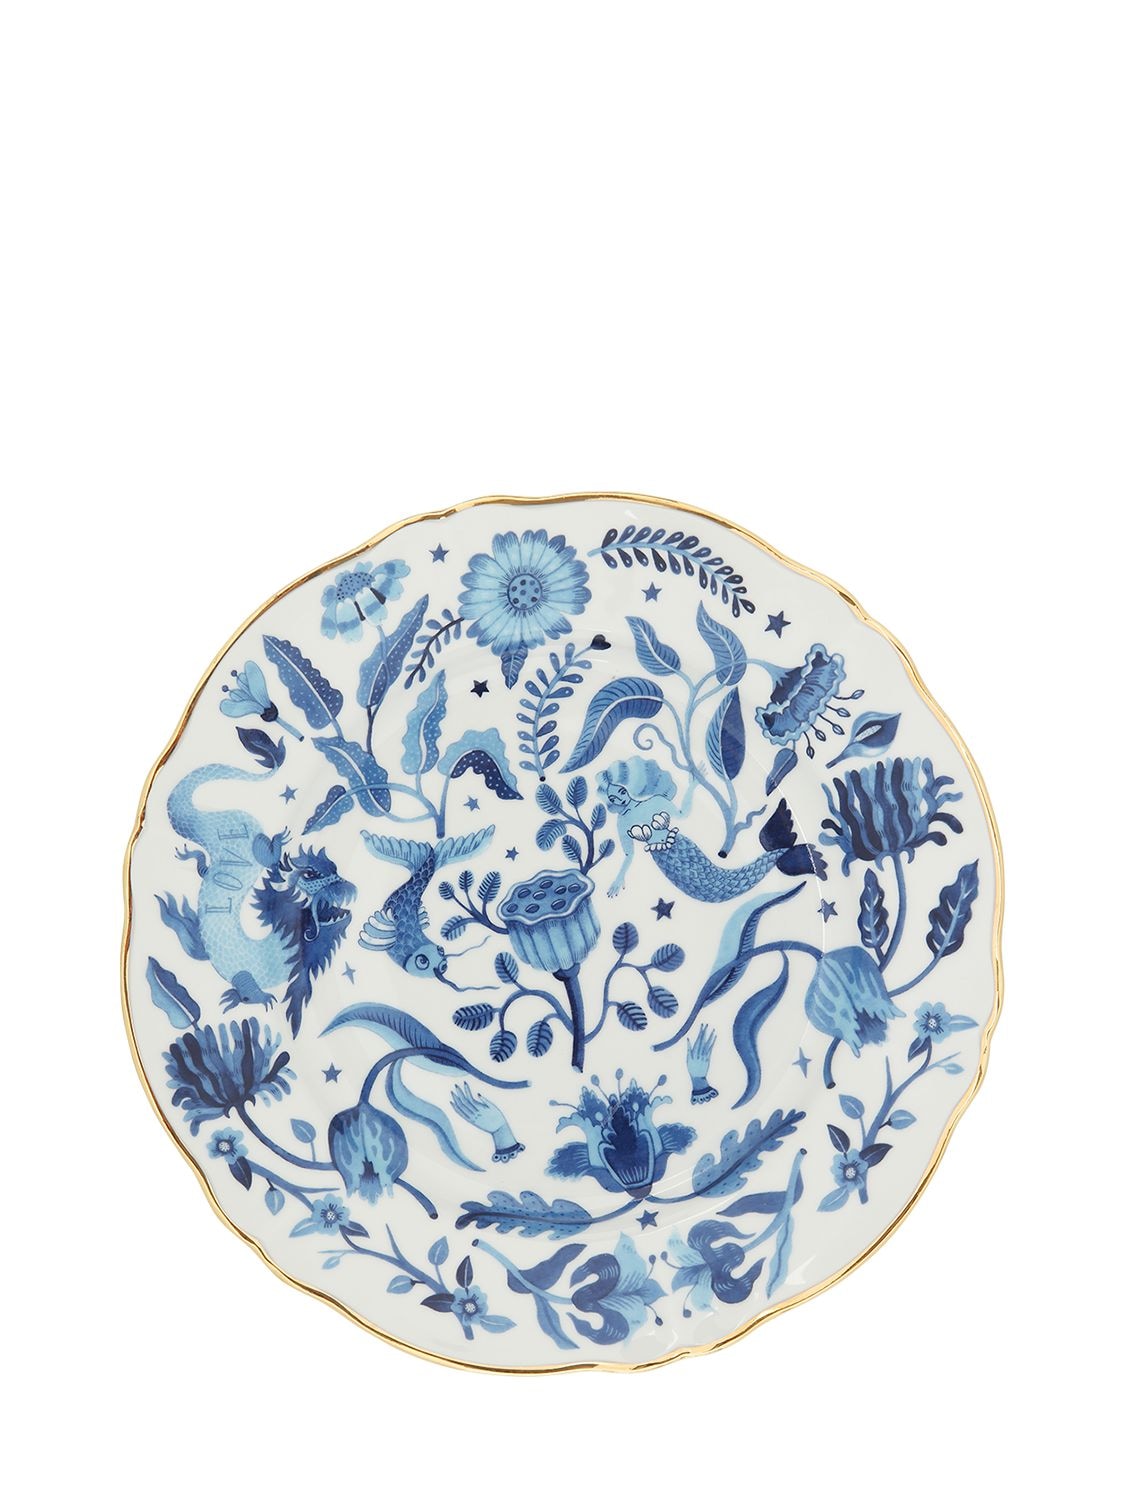 Image of Painted Porcelain Dinner Plate